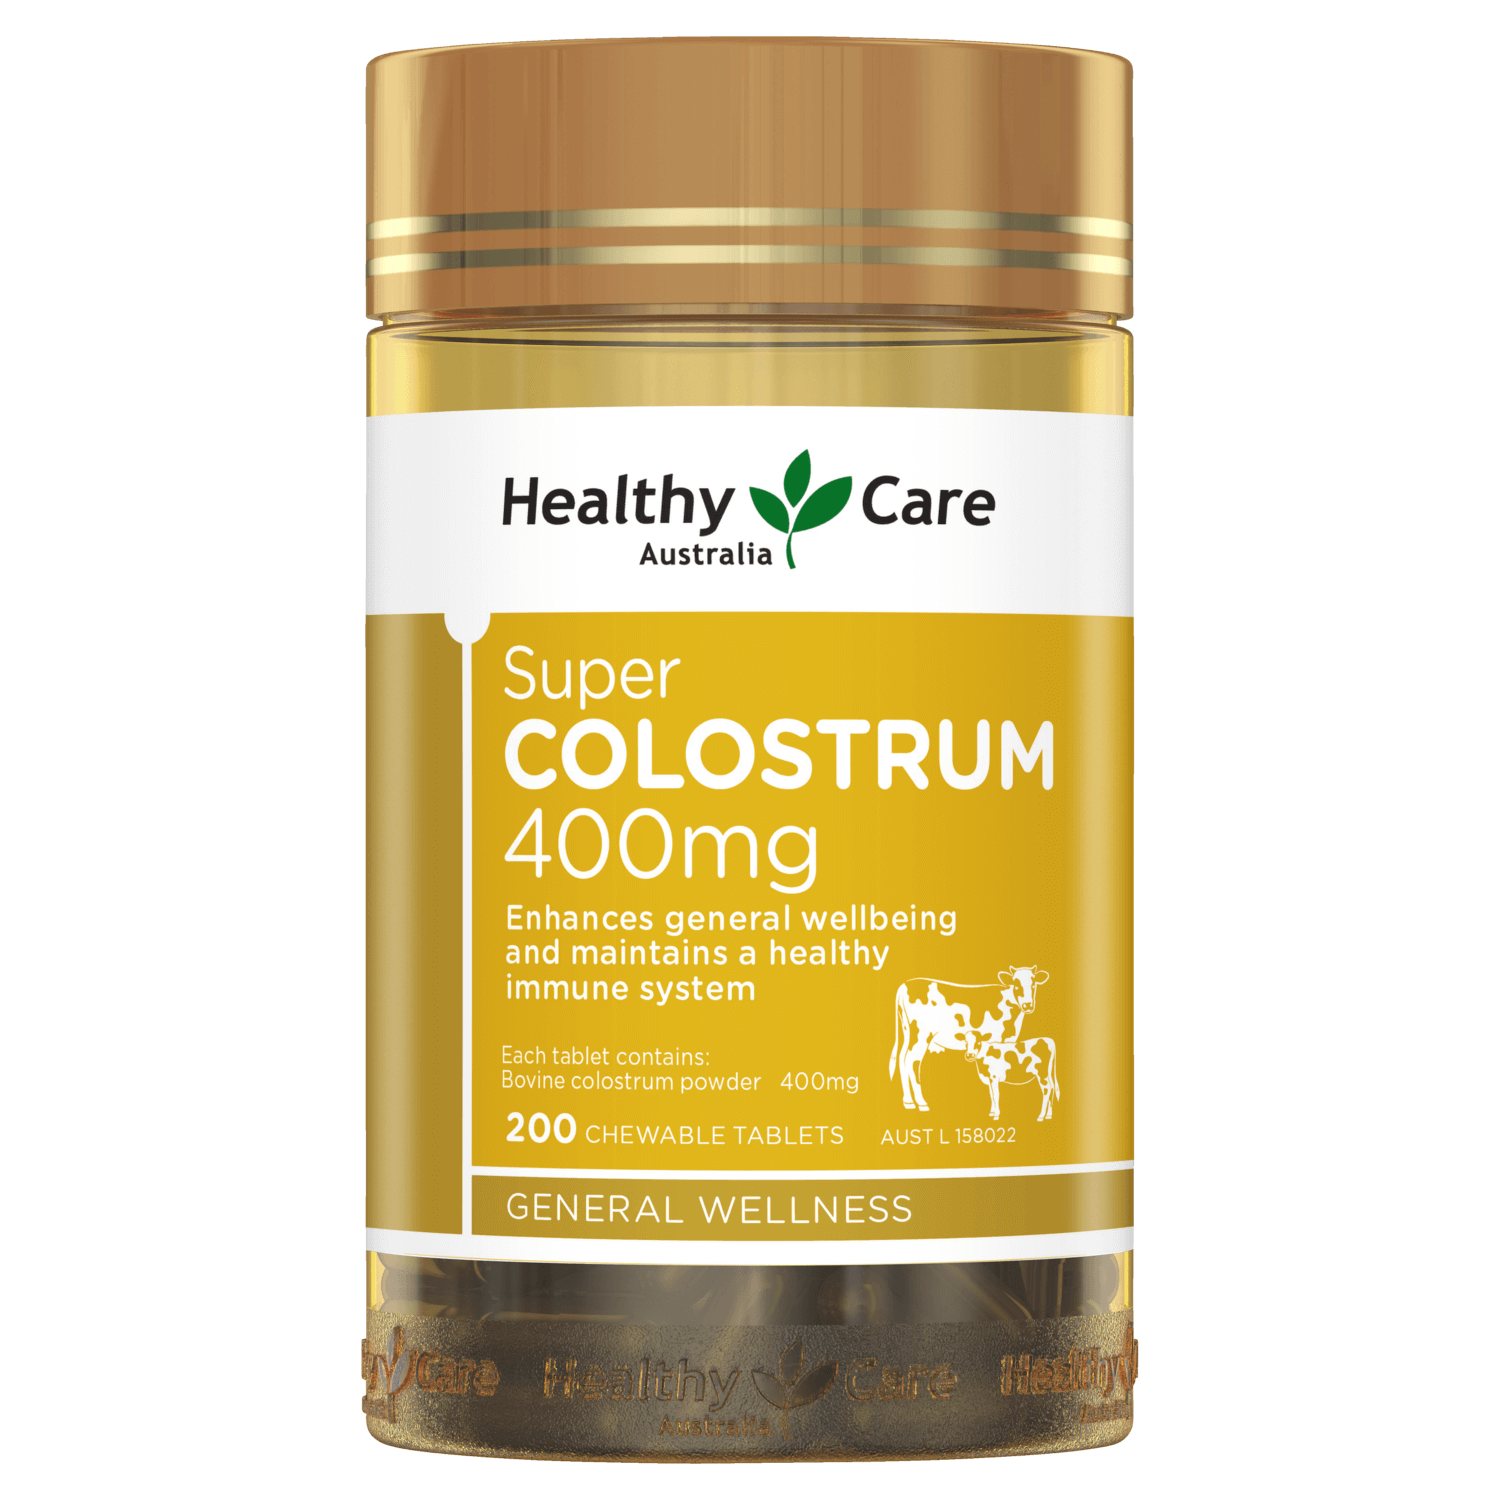 Healthy Care Super Colostrum 400mg 200 Chewable Tablets